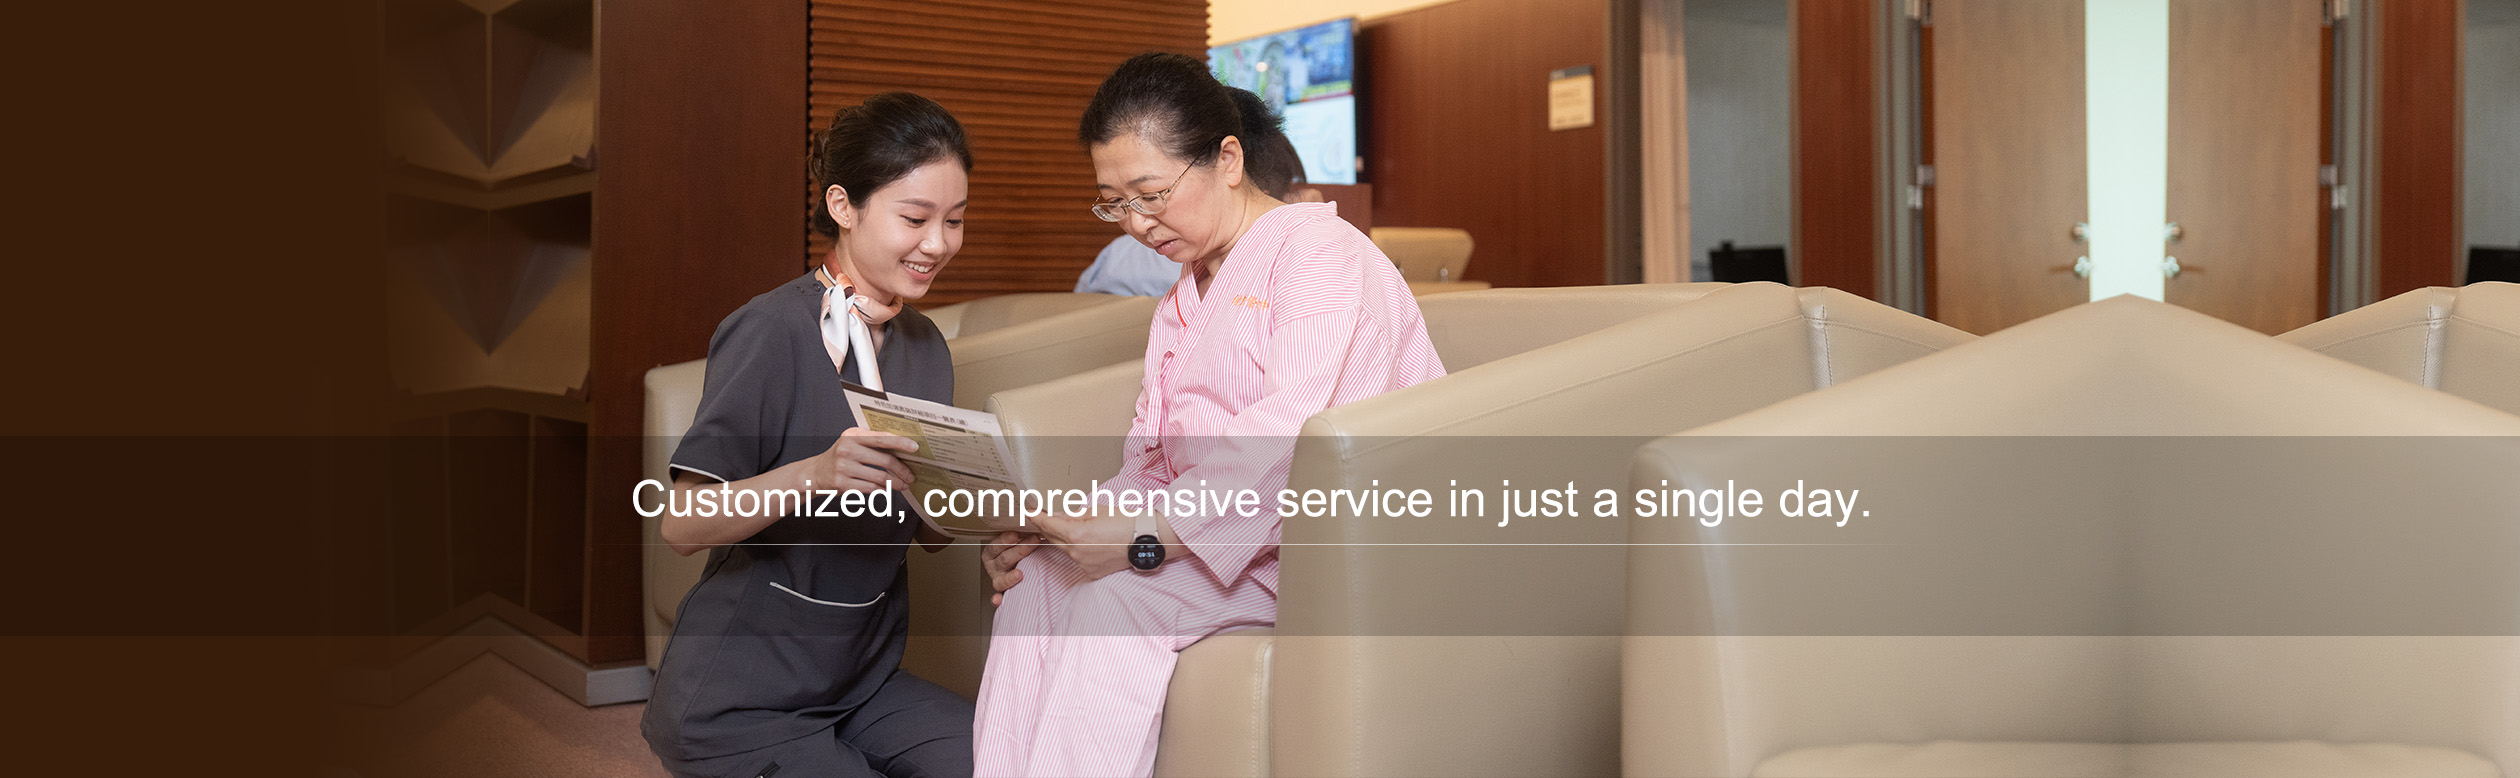 Customized, comprehensive service in just a single day.